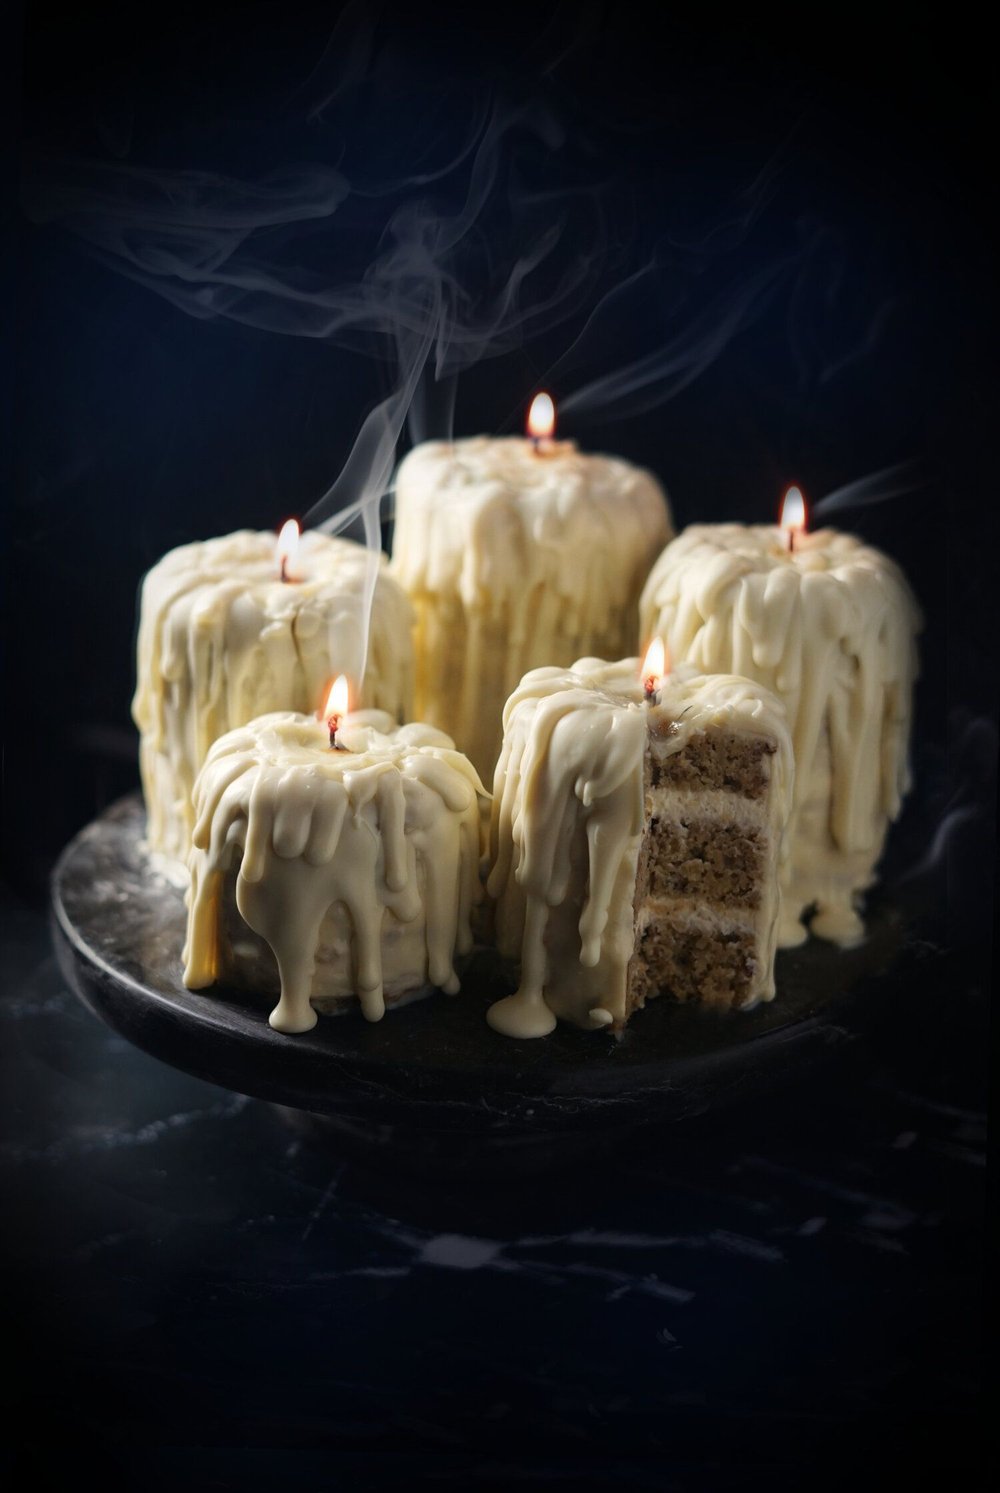 Beeswax-Infused Parsnip Candle Cakes_ A Time For Illumination  — The Wondersmith.jpg